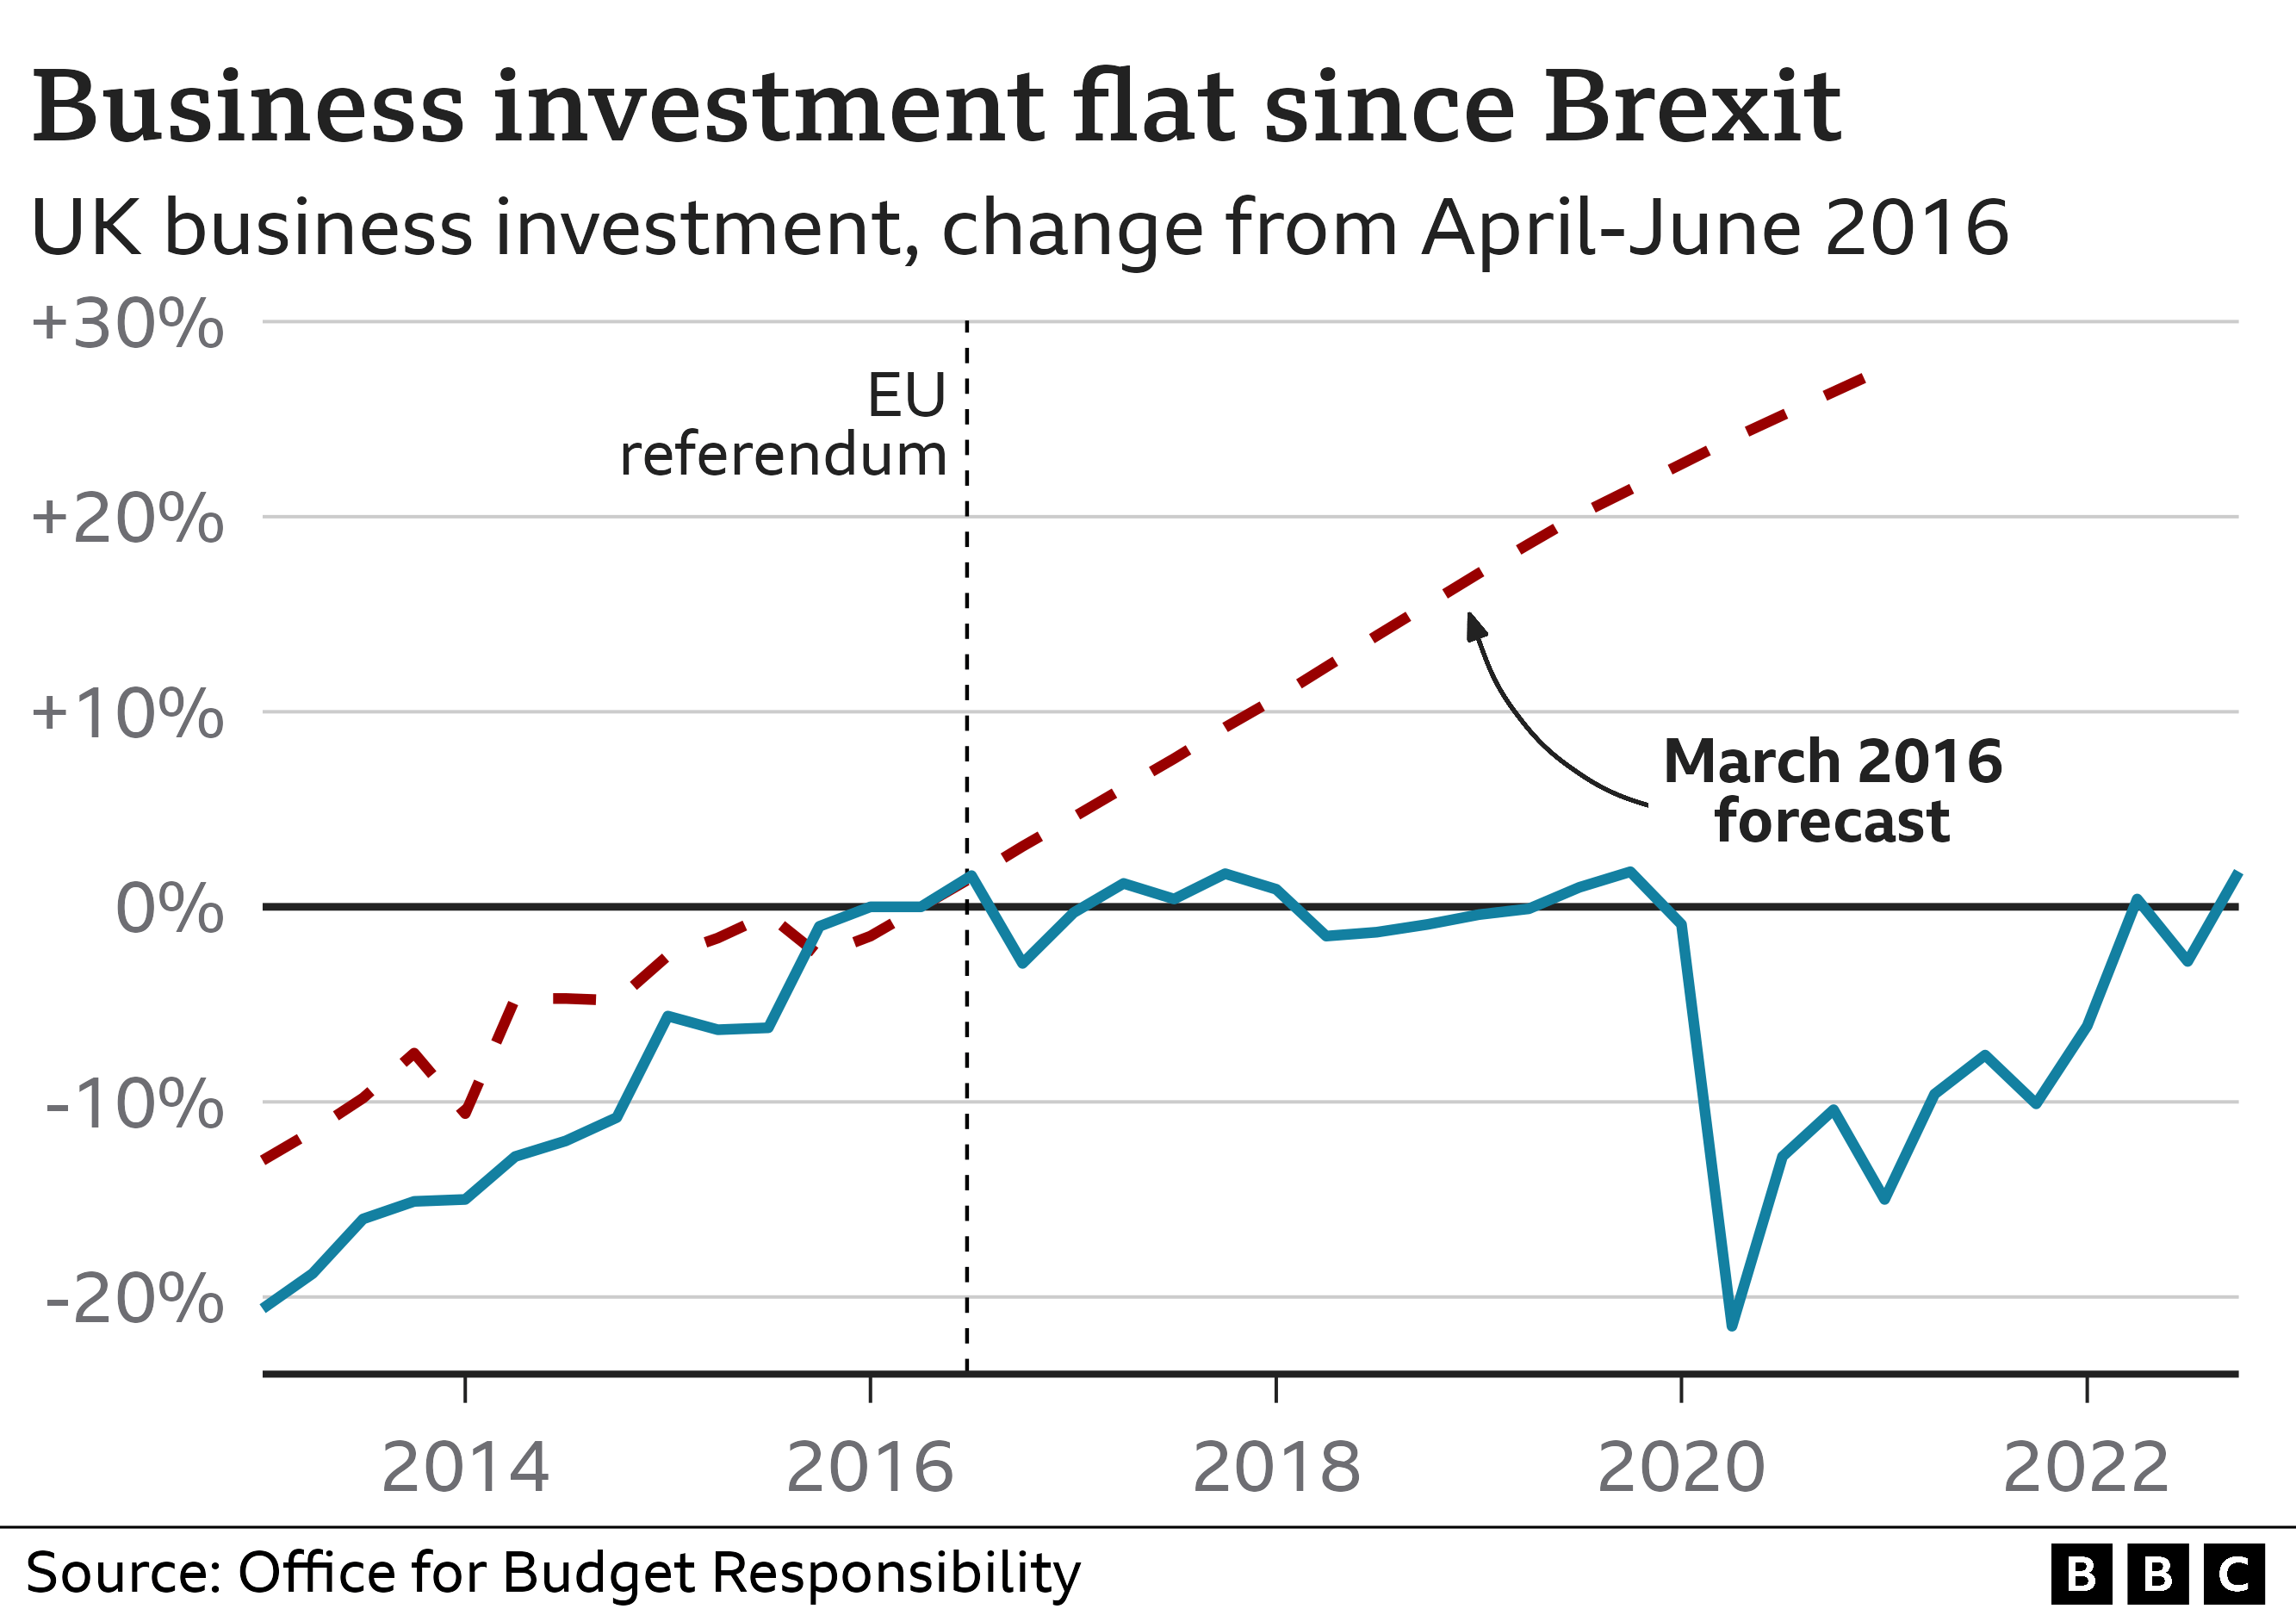 Chart showing UK business investment